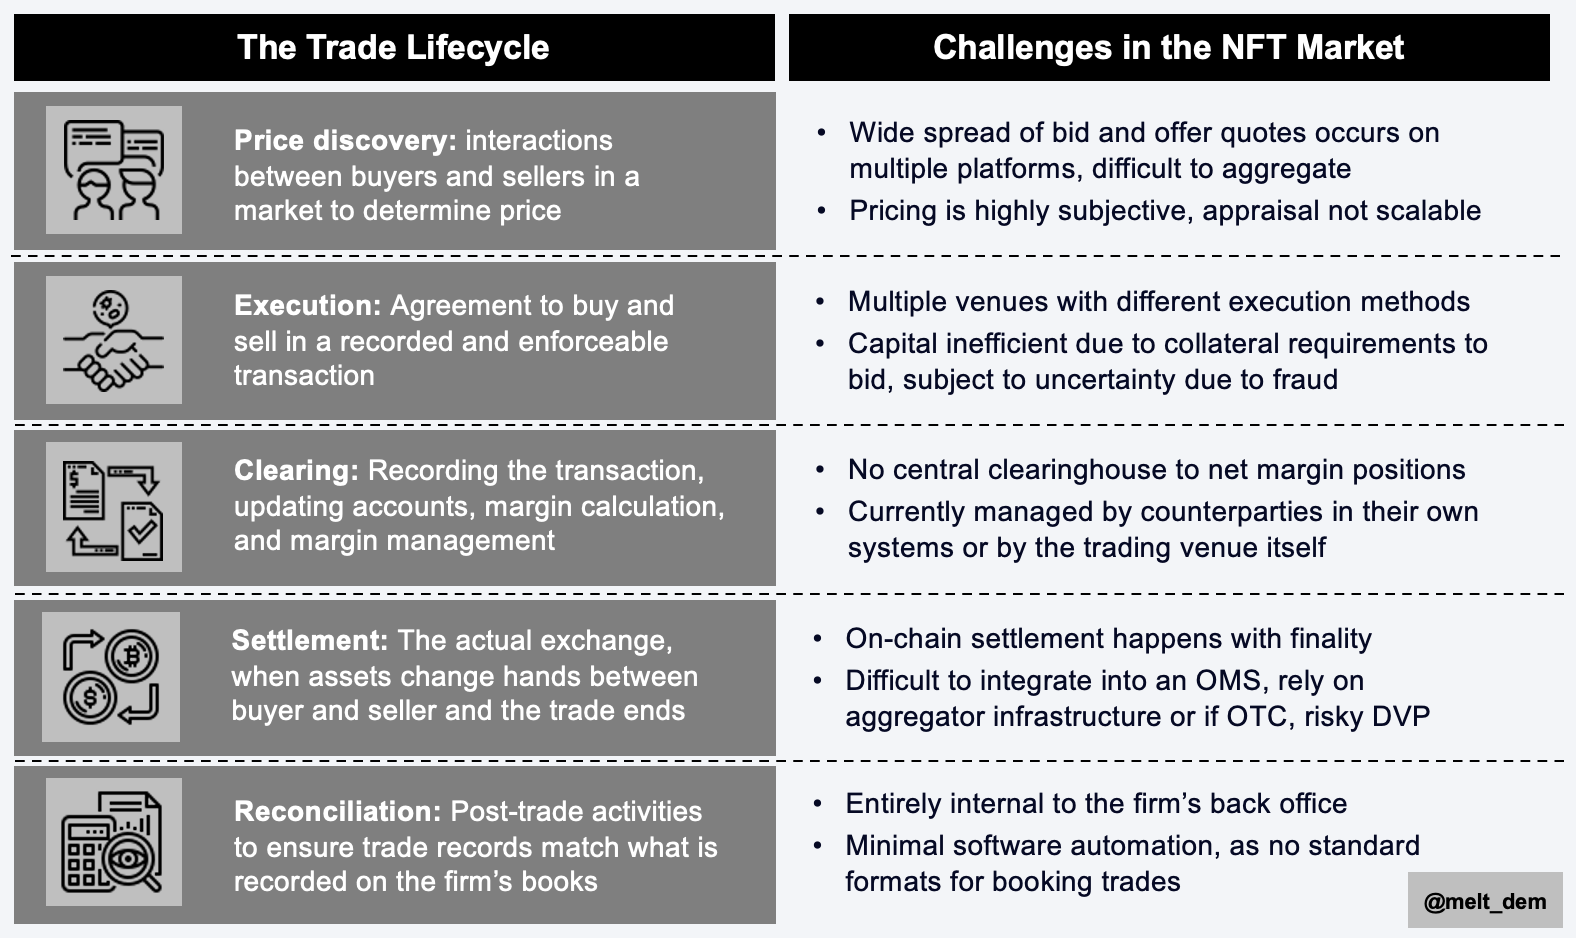 Market structure focused companies may address one, several, or all aspects of this workflow